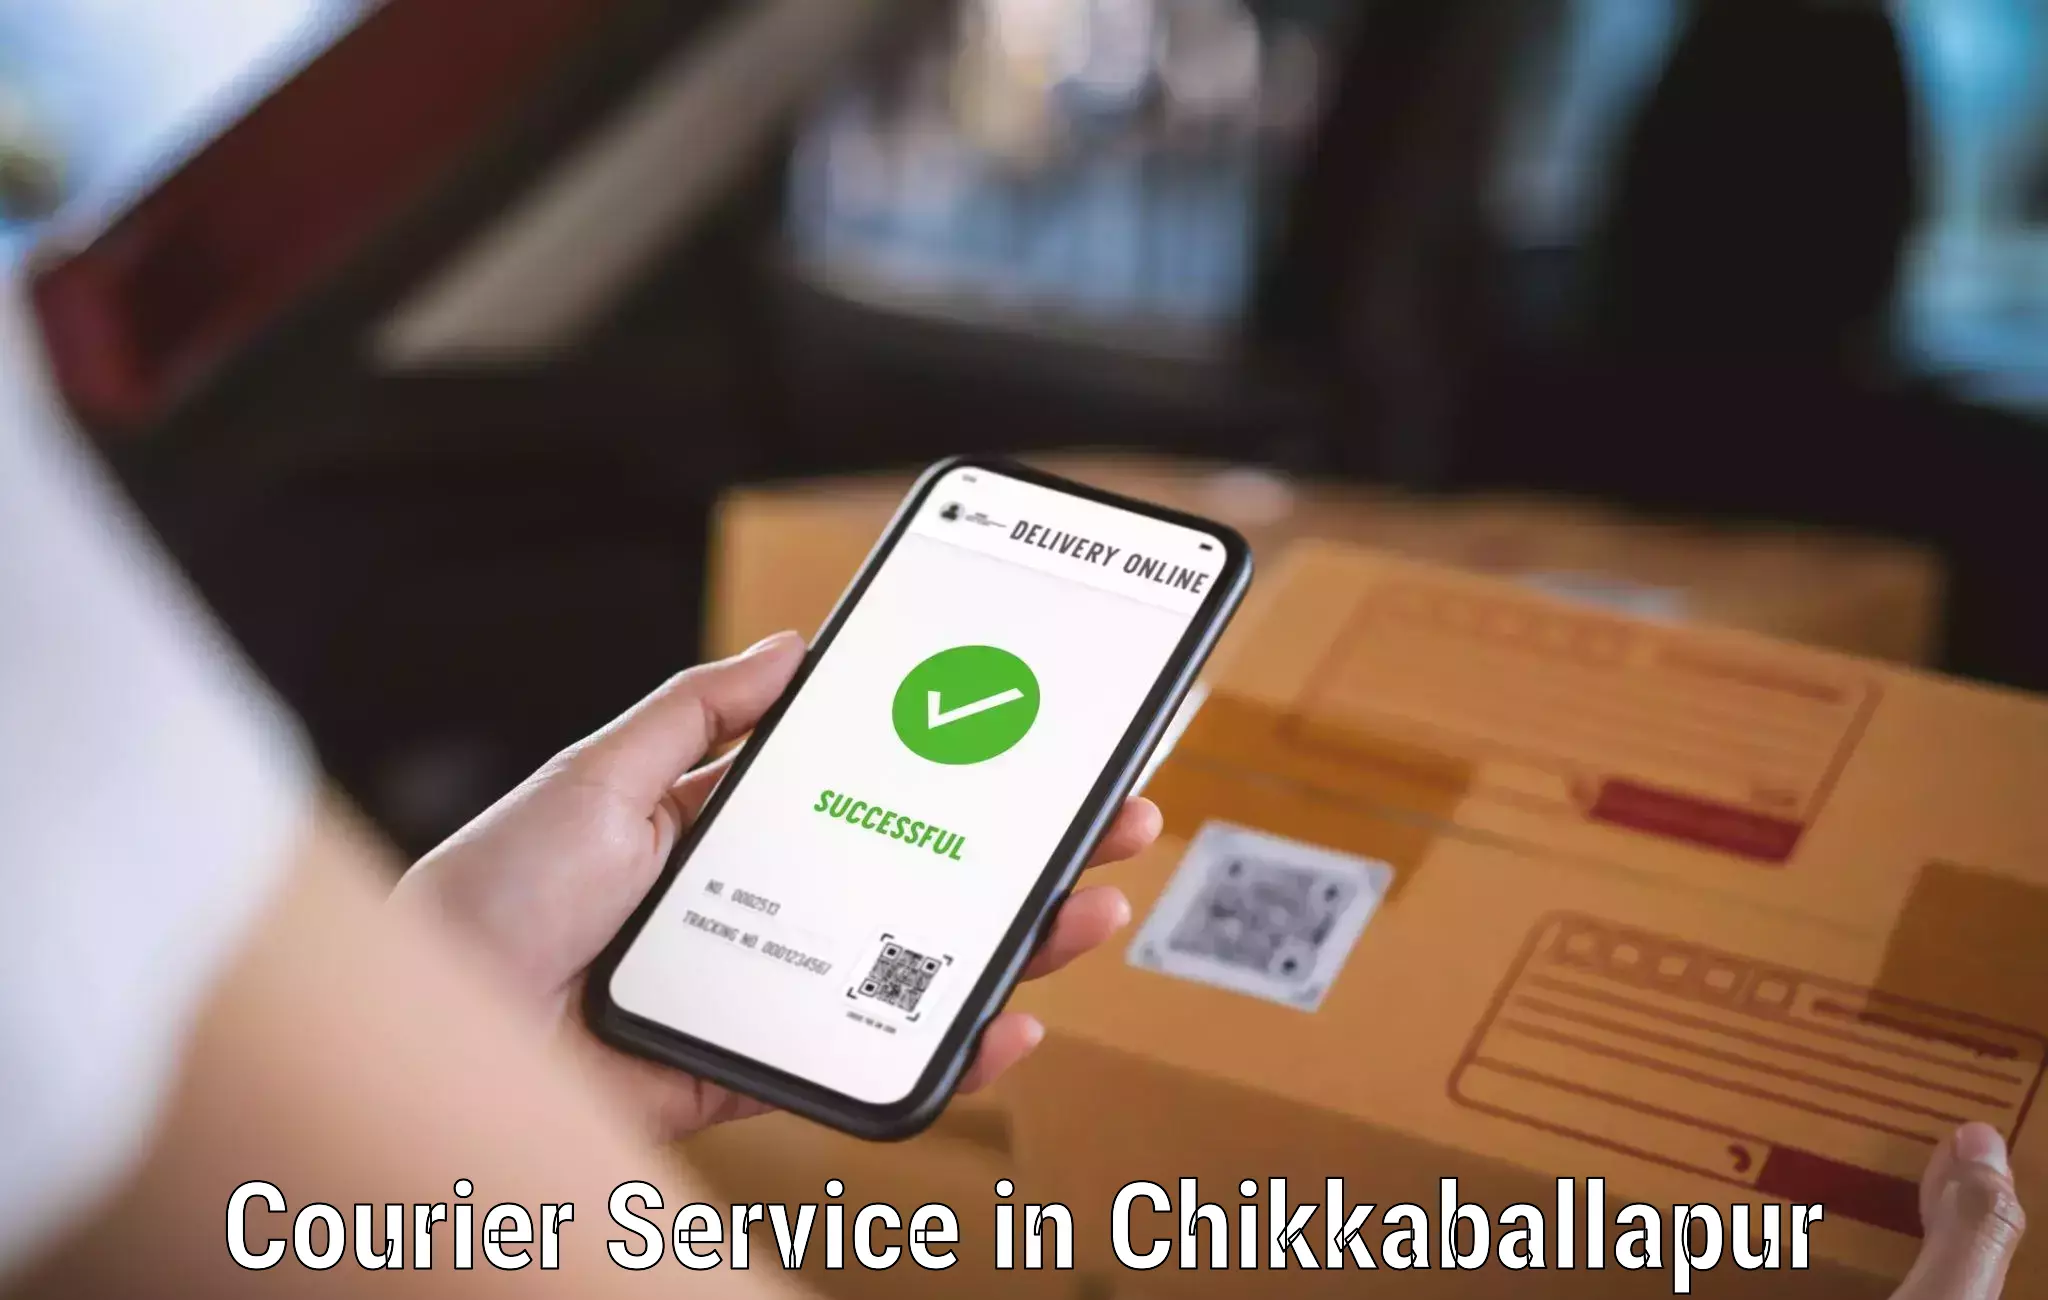 Overnight delivery services in Chikkaballapur